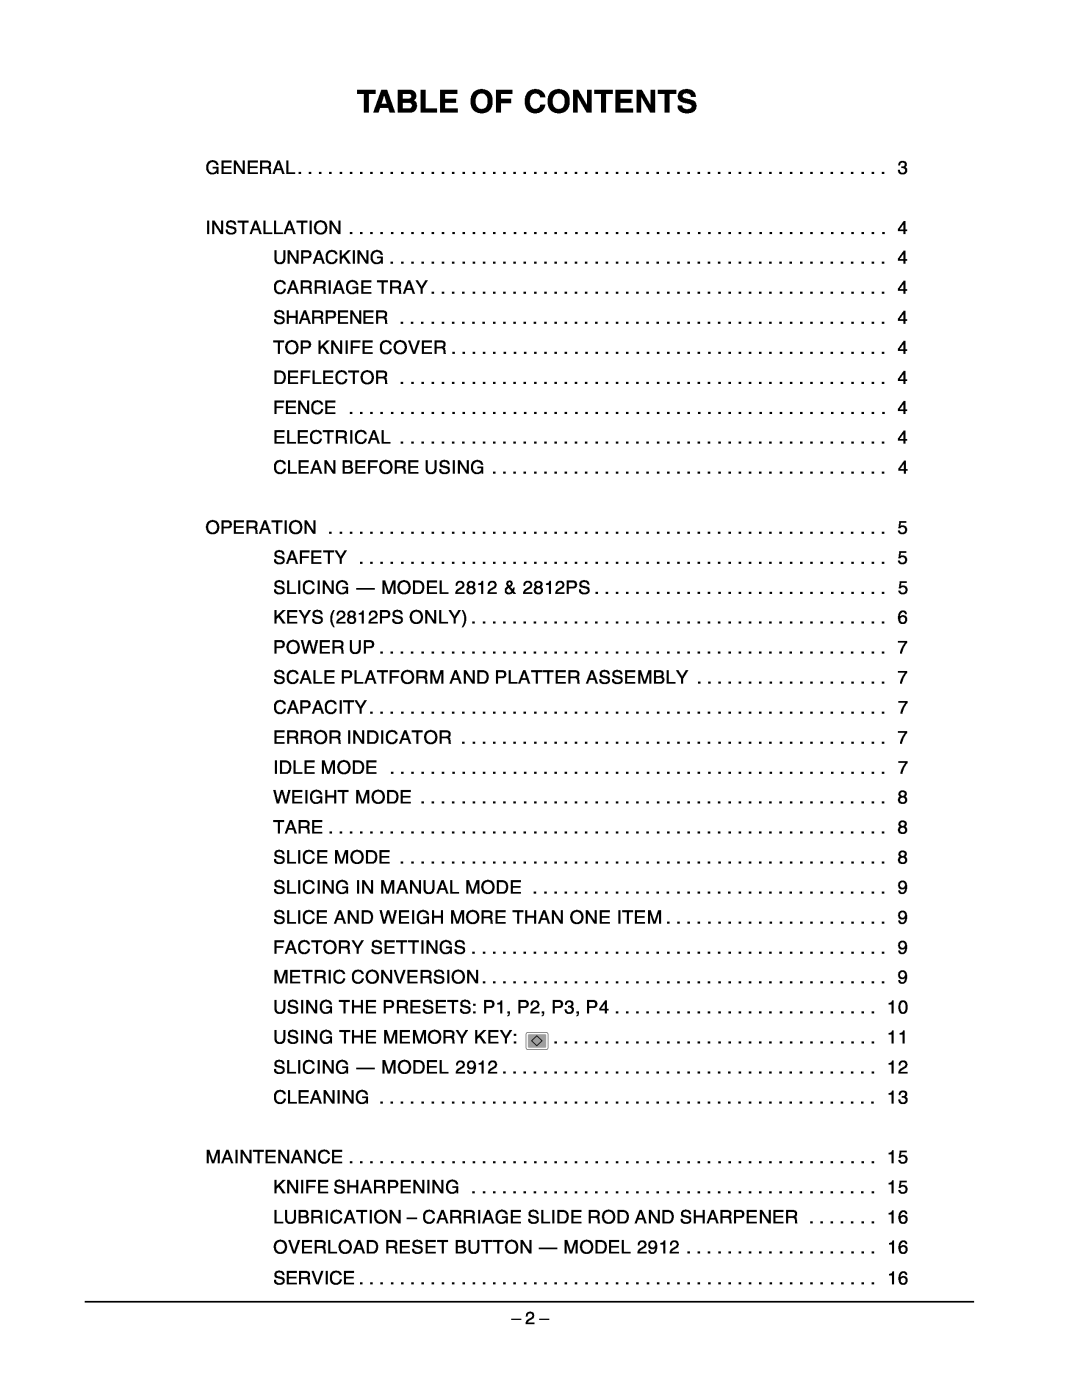 Hobart 2812 manual Table Of Contents, General 